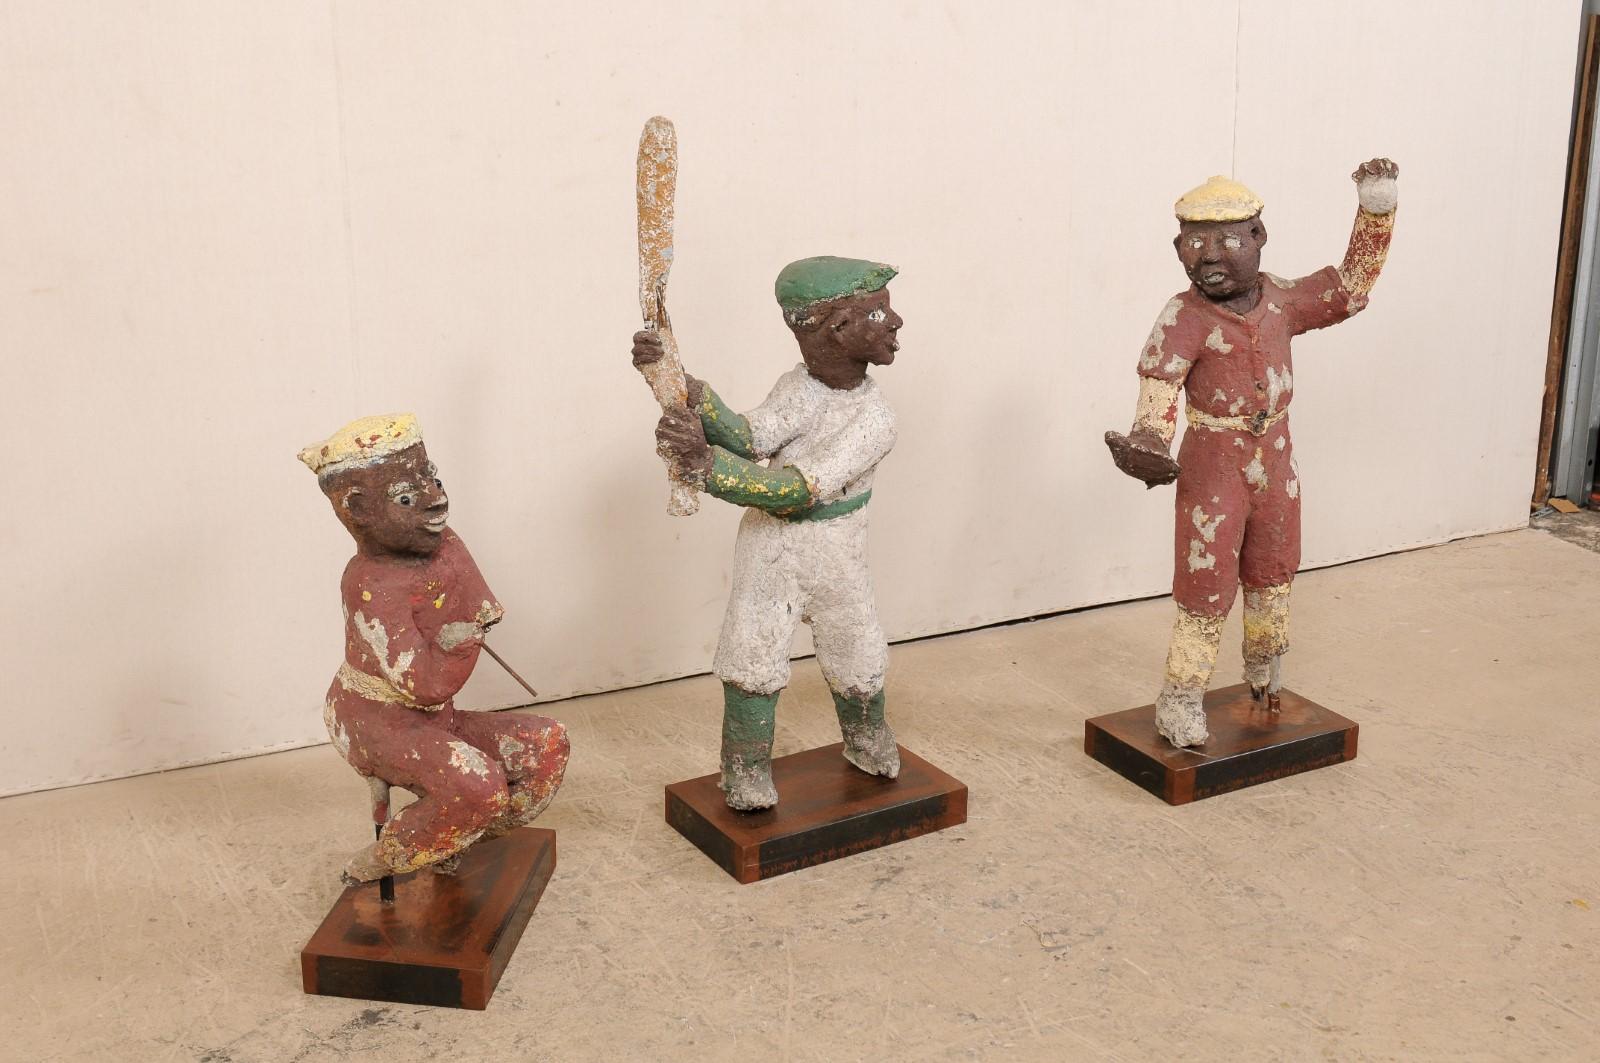 This collection of three Black Americana baseball figures, circa 1930s-1940s, are attributed to the San Antonio folk artist, Control Valadez. The set of Black memorabilia, sometimes called Black Americana, includes a pitcher, catcher & batter, each